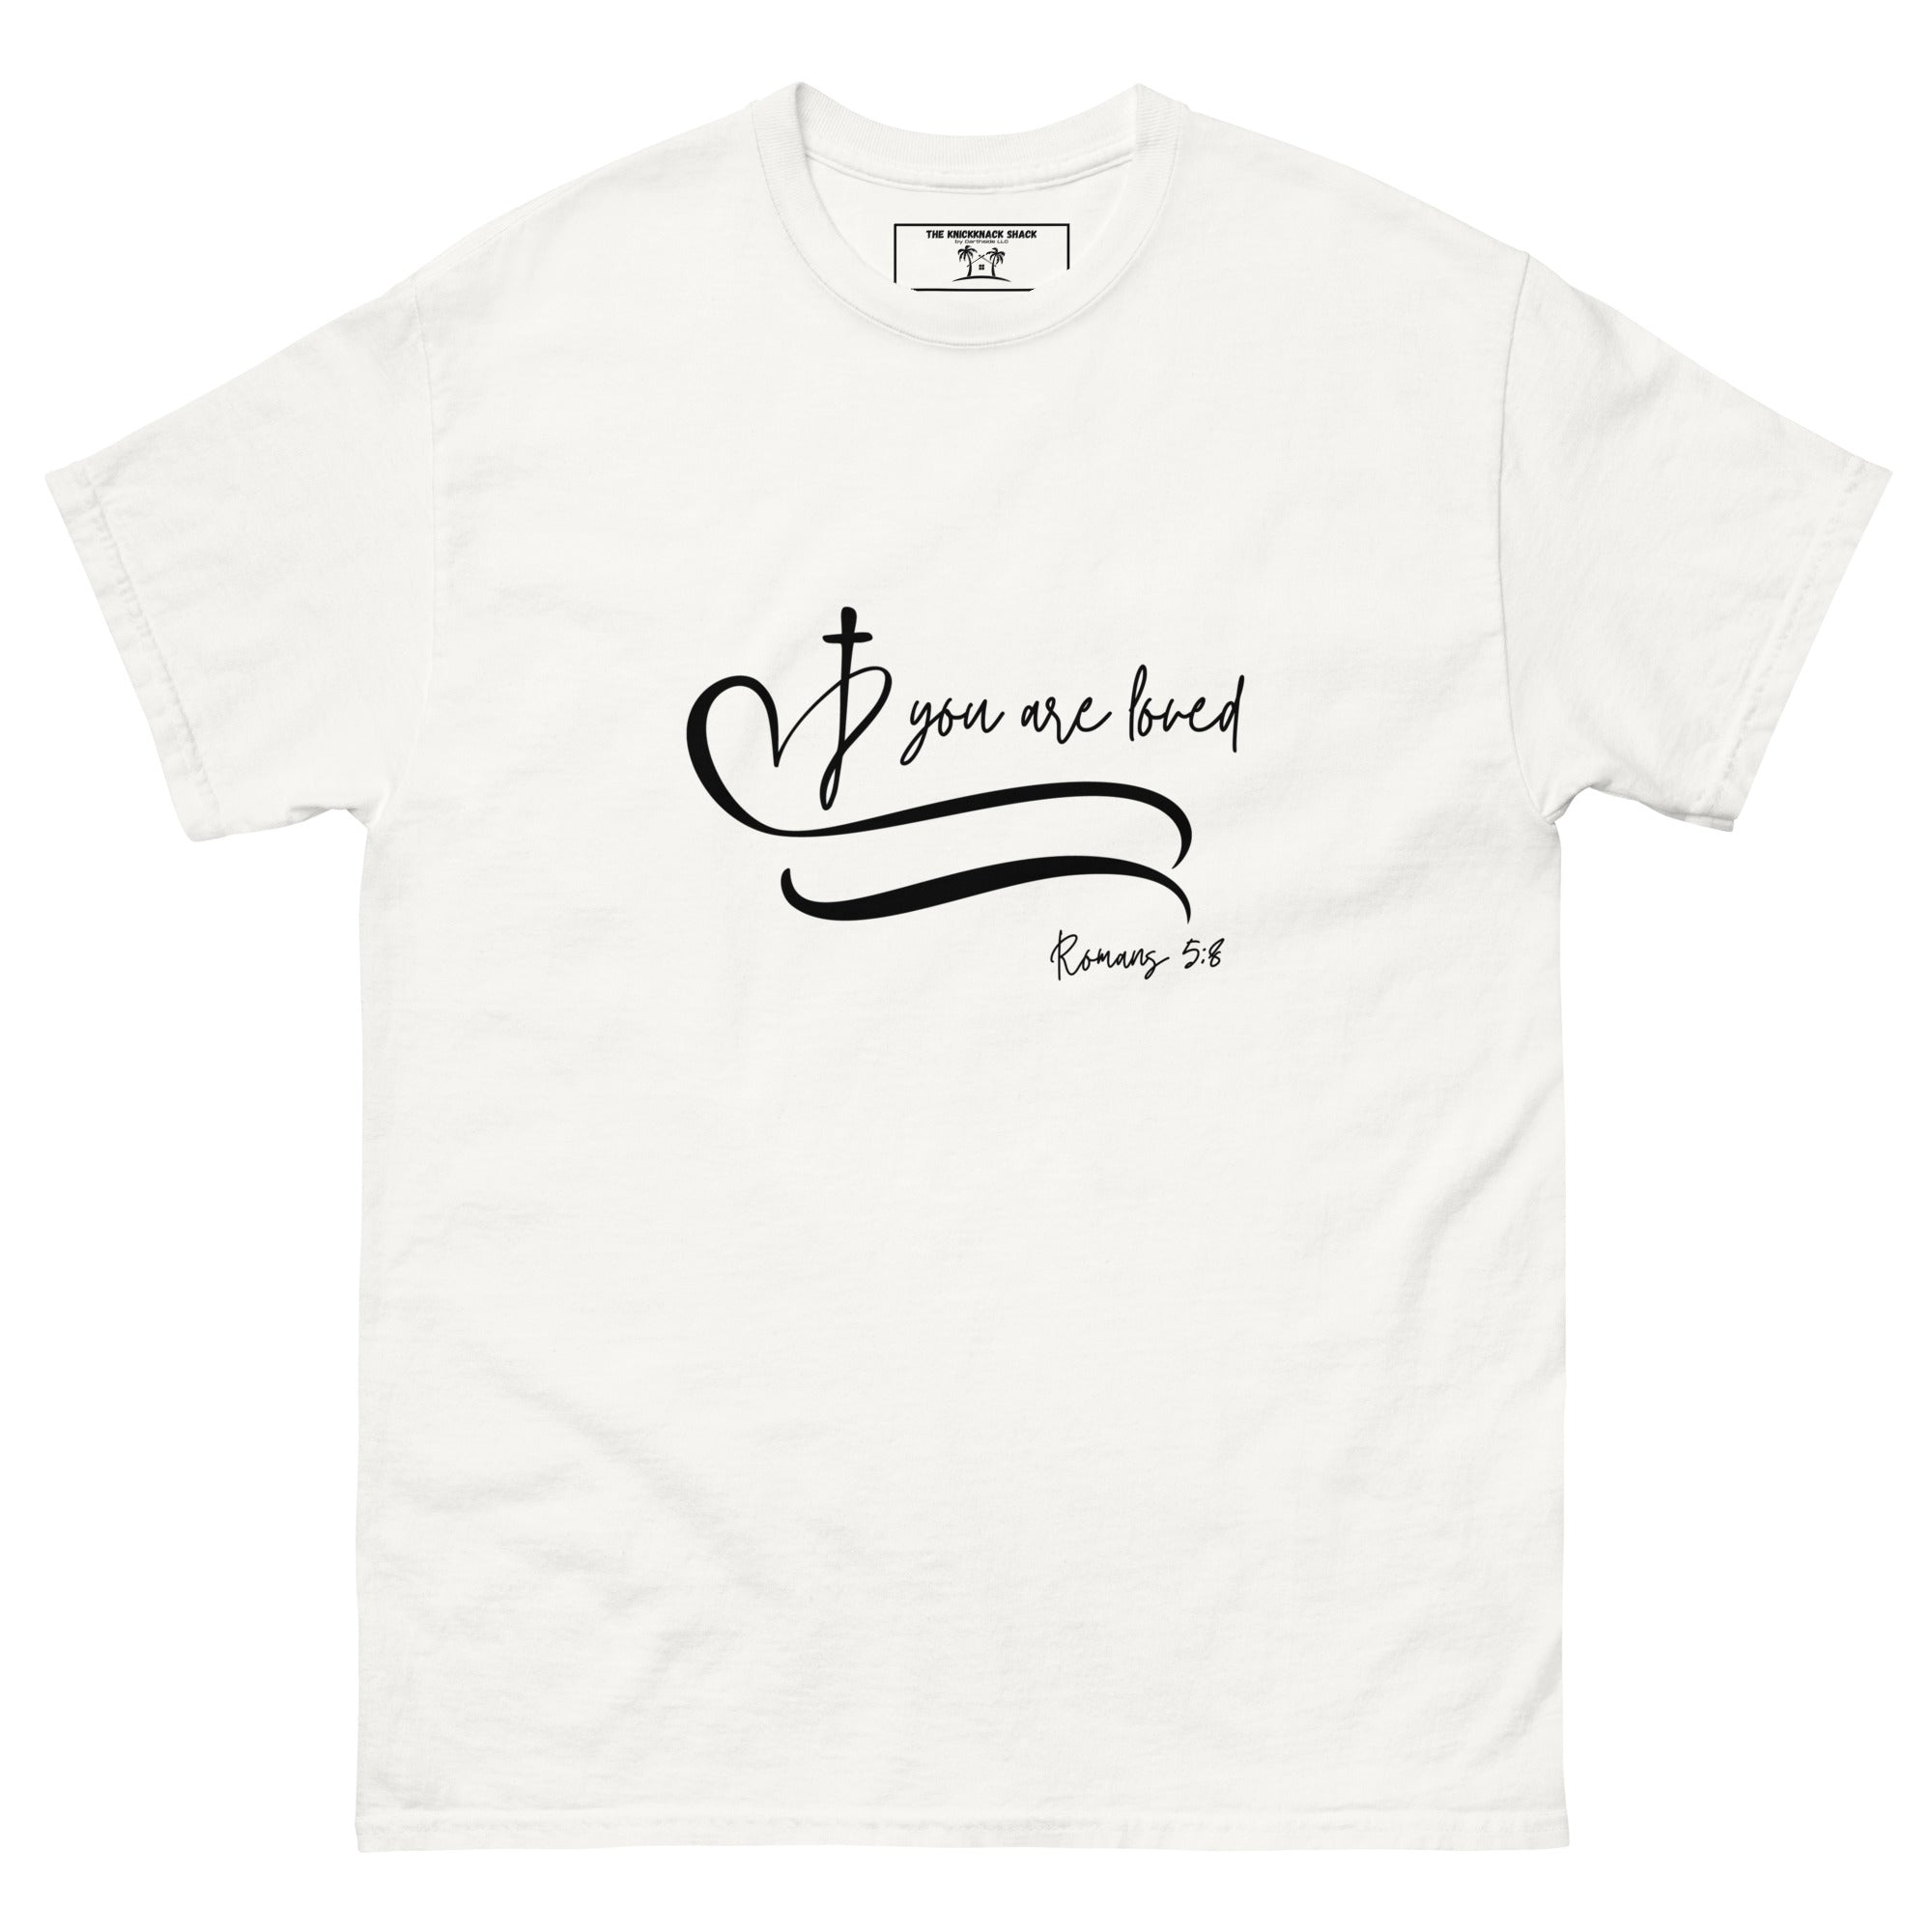 Classic Tee - Loved (Light Colors) XL